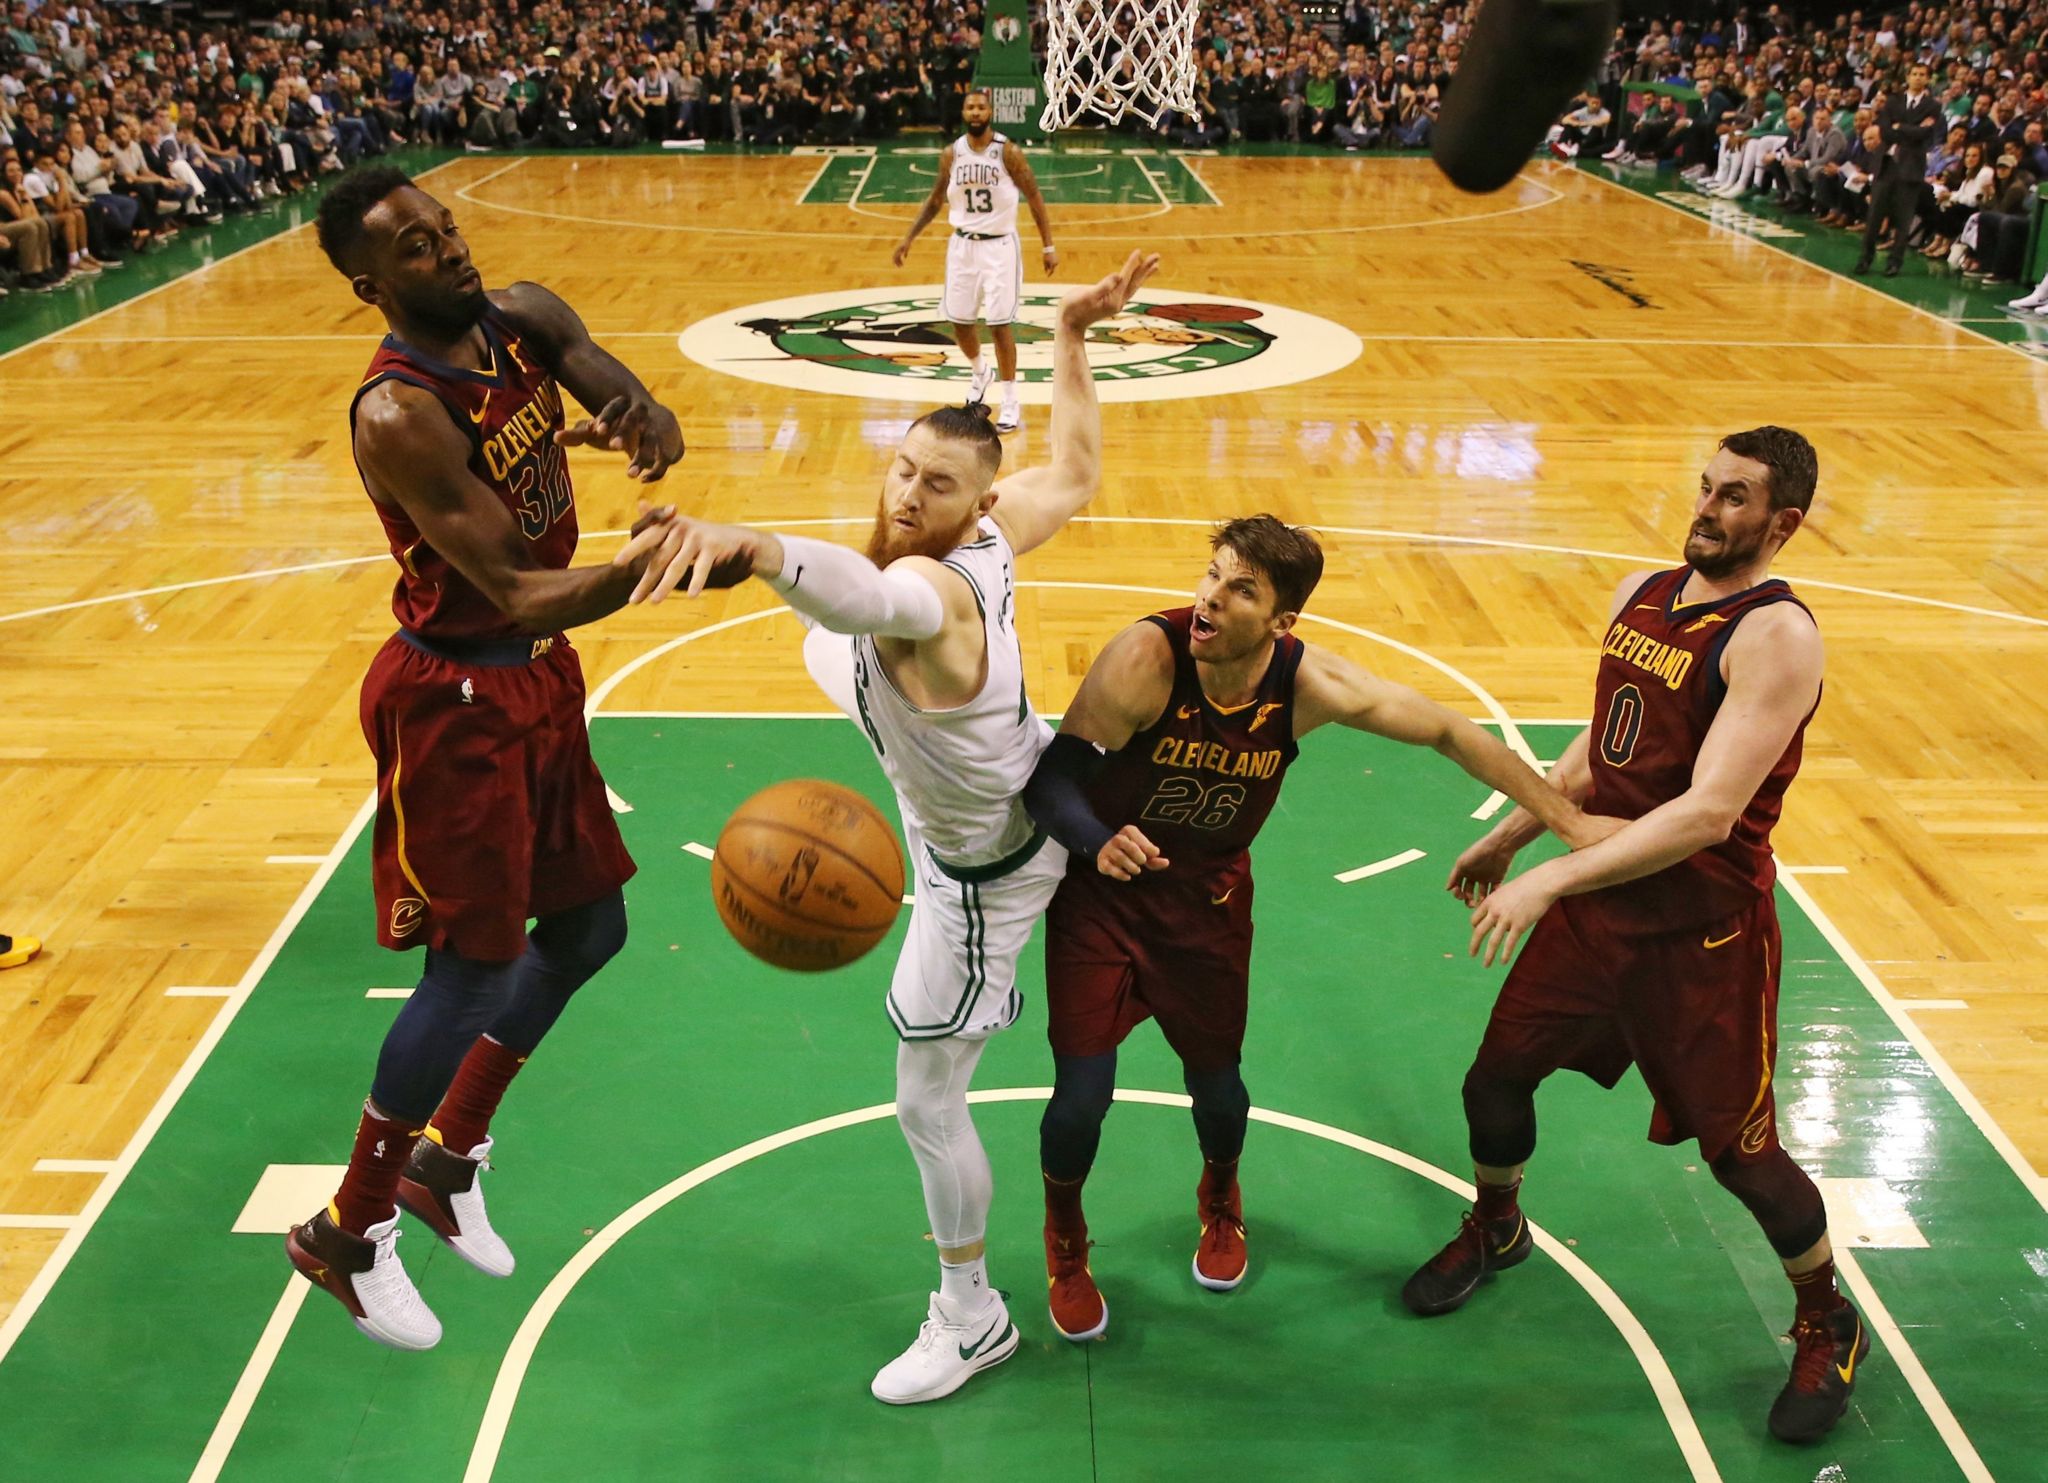 Jeff Green #32 of the Cleveland Cavaliers and Aron Baynes #46 of the Boston Celtics battle for the ball during the third quarter in Game One of the Eastern Conference Finals of the 2018 NBA Playoffs at TD Garden on May 13, 2018 in Boston, Massachusetts. The Boston Celtics defeated the Cleveland Cavaliers 108-83